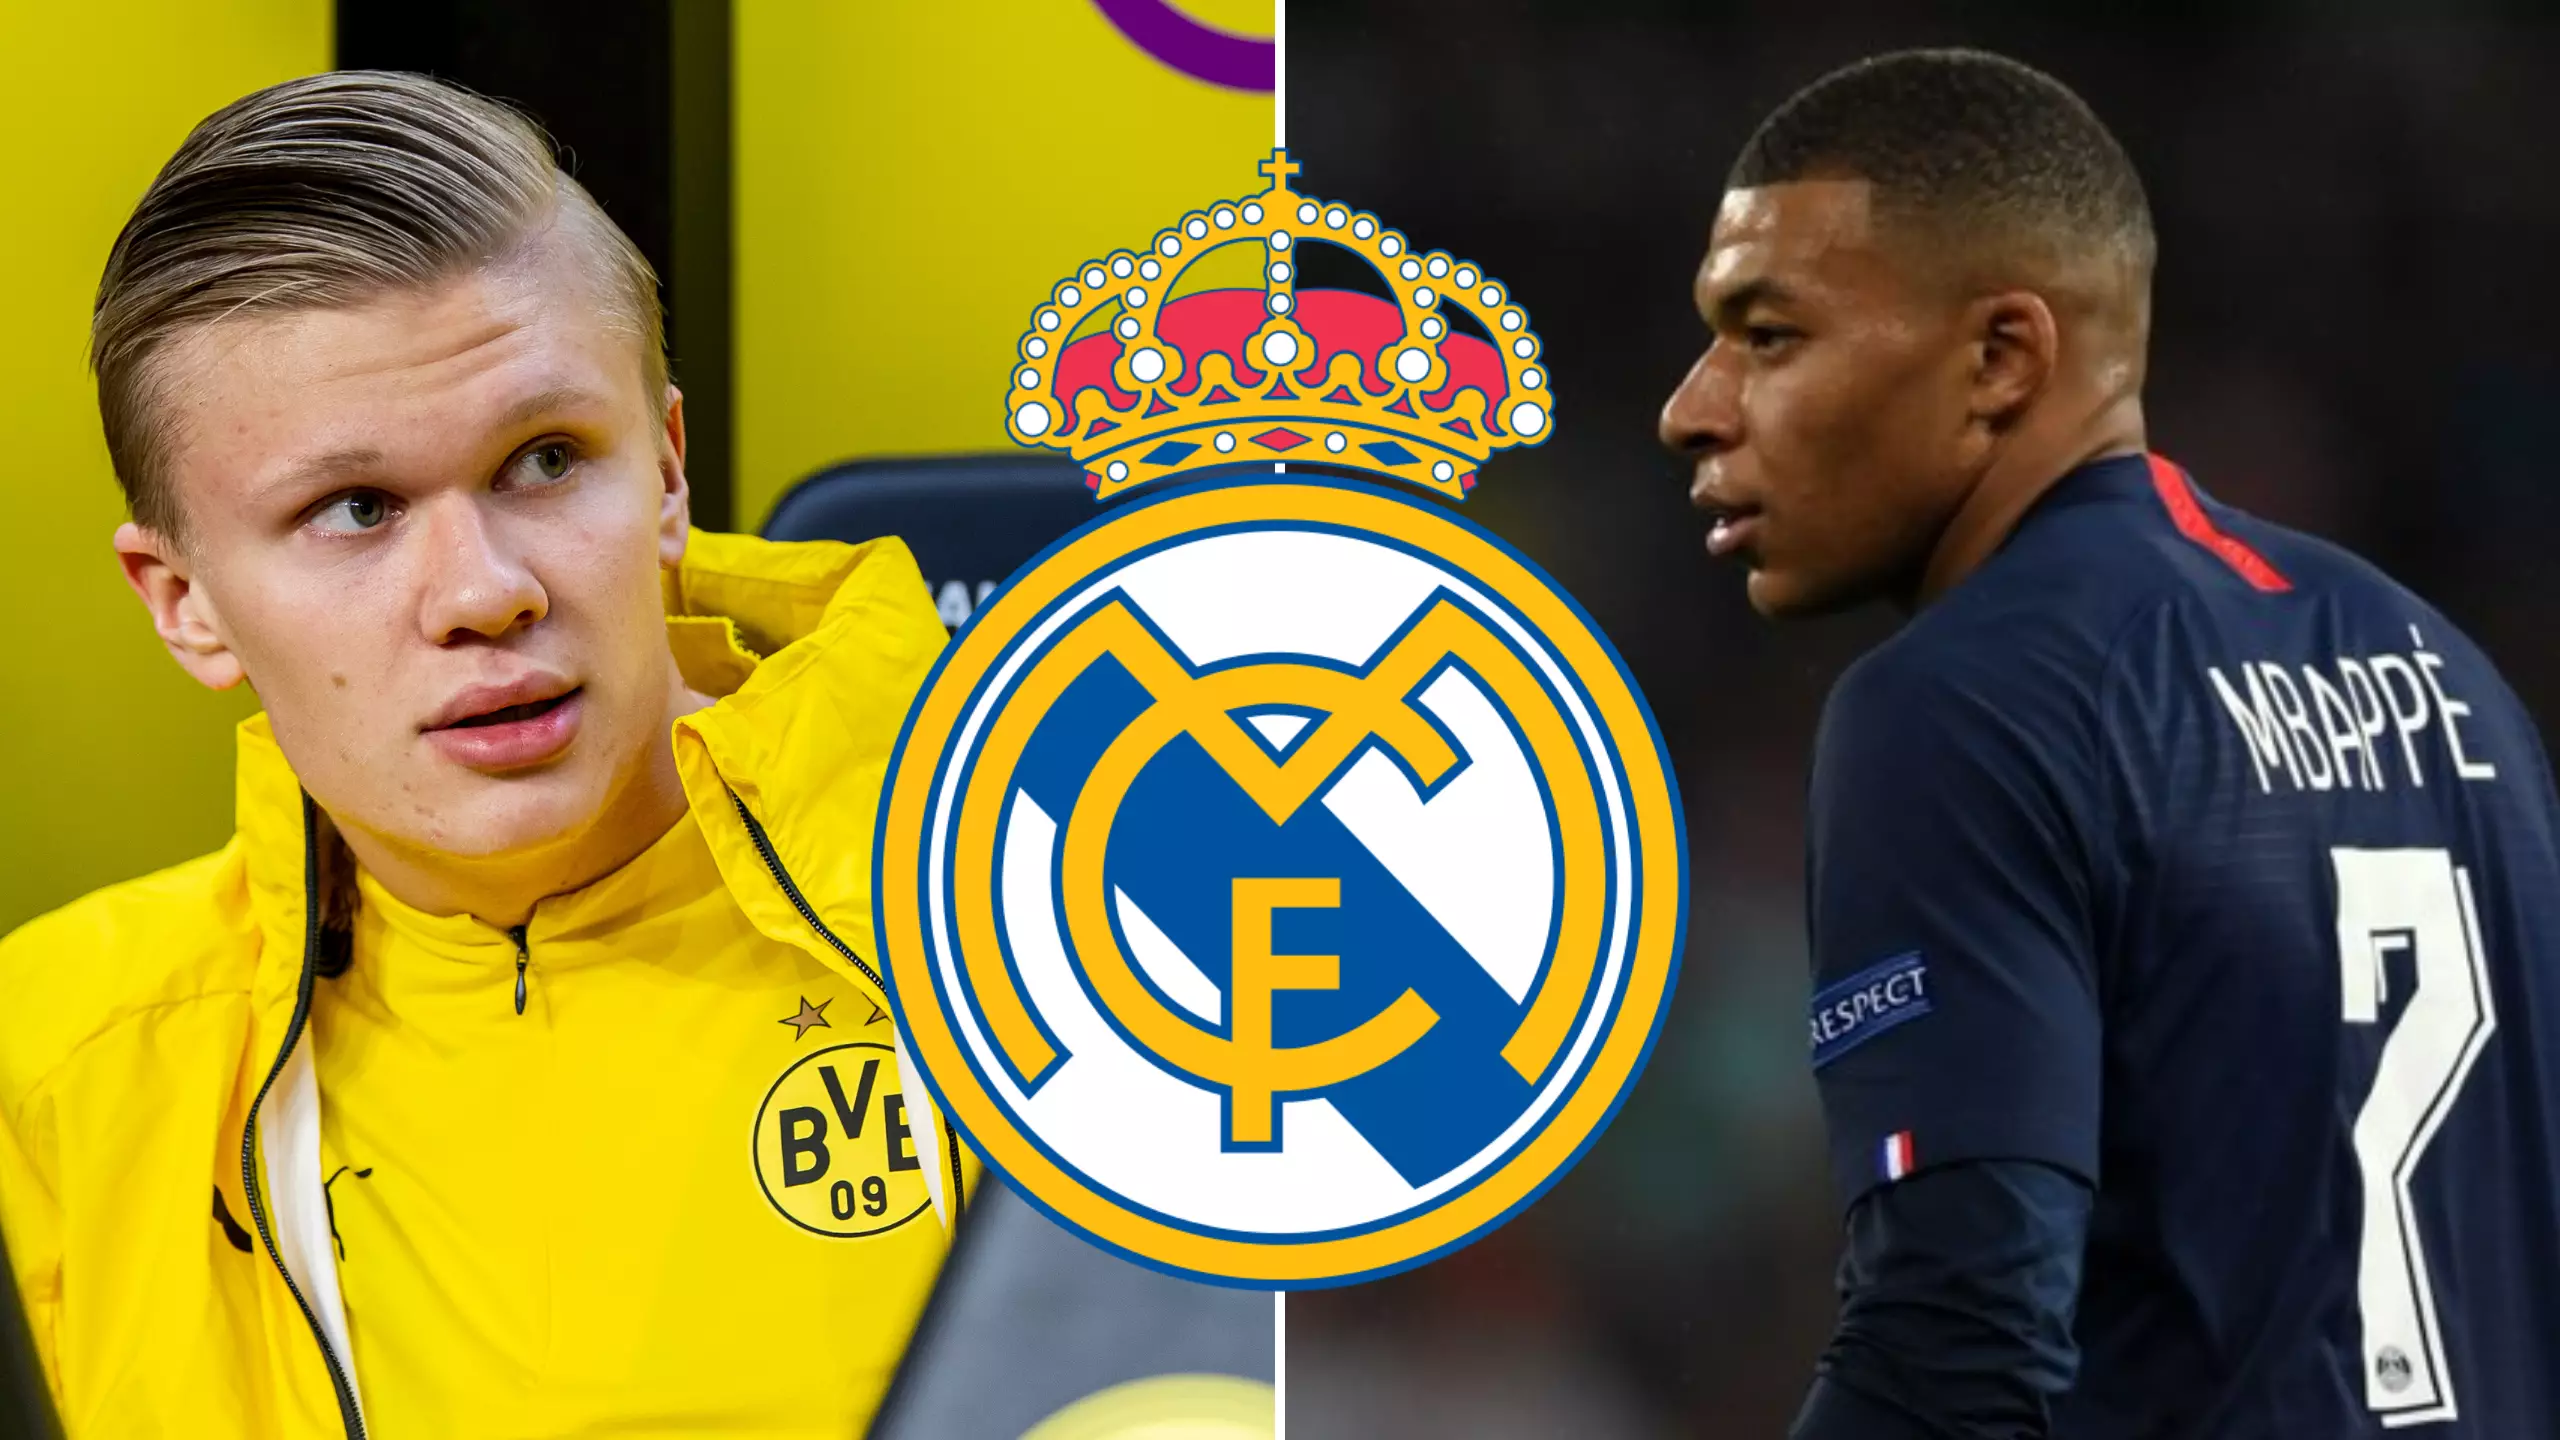 Real Madrid Want To Sign Erling Haaland In 2020 And Kylian Mbappe In 2021